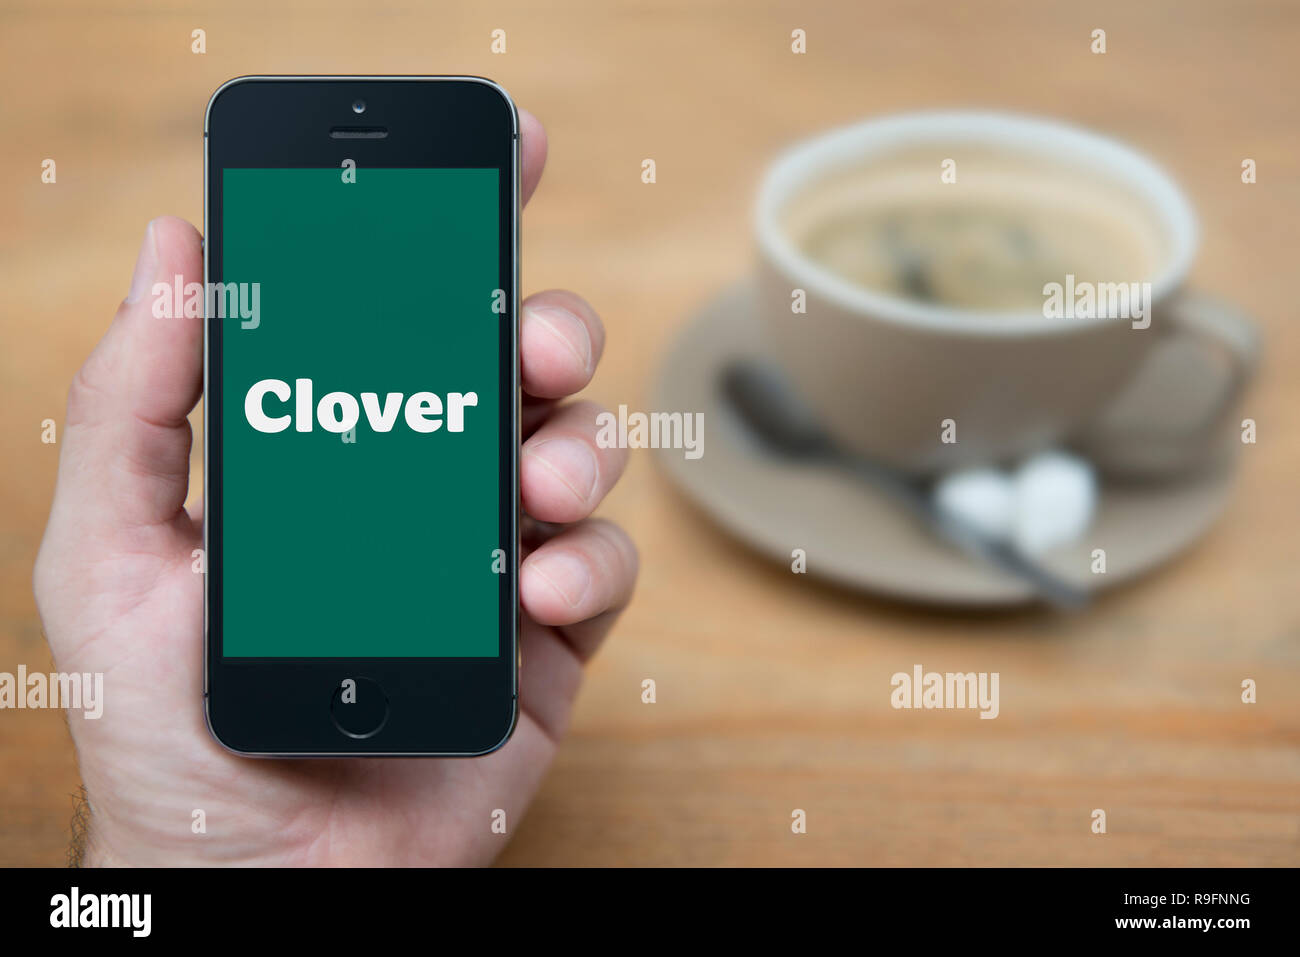 A man looks at his iPhone which displays the Clover logo (Editorial use only). Stock Photo